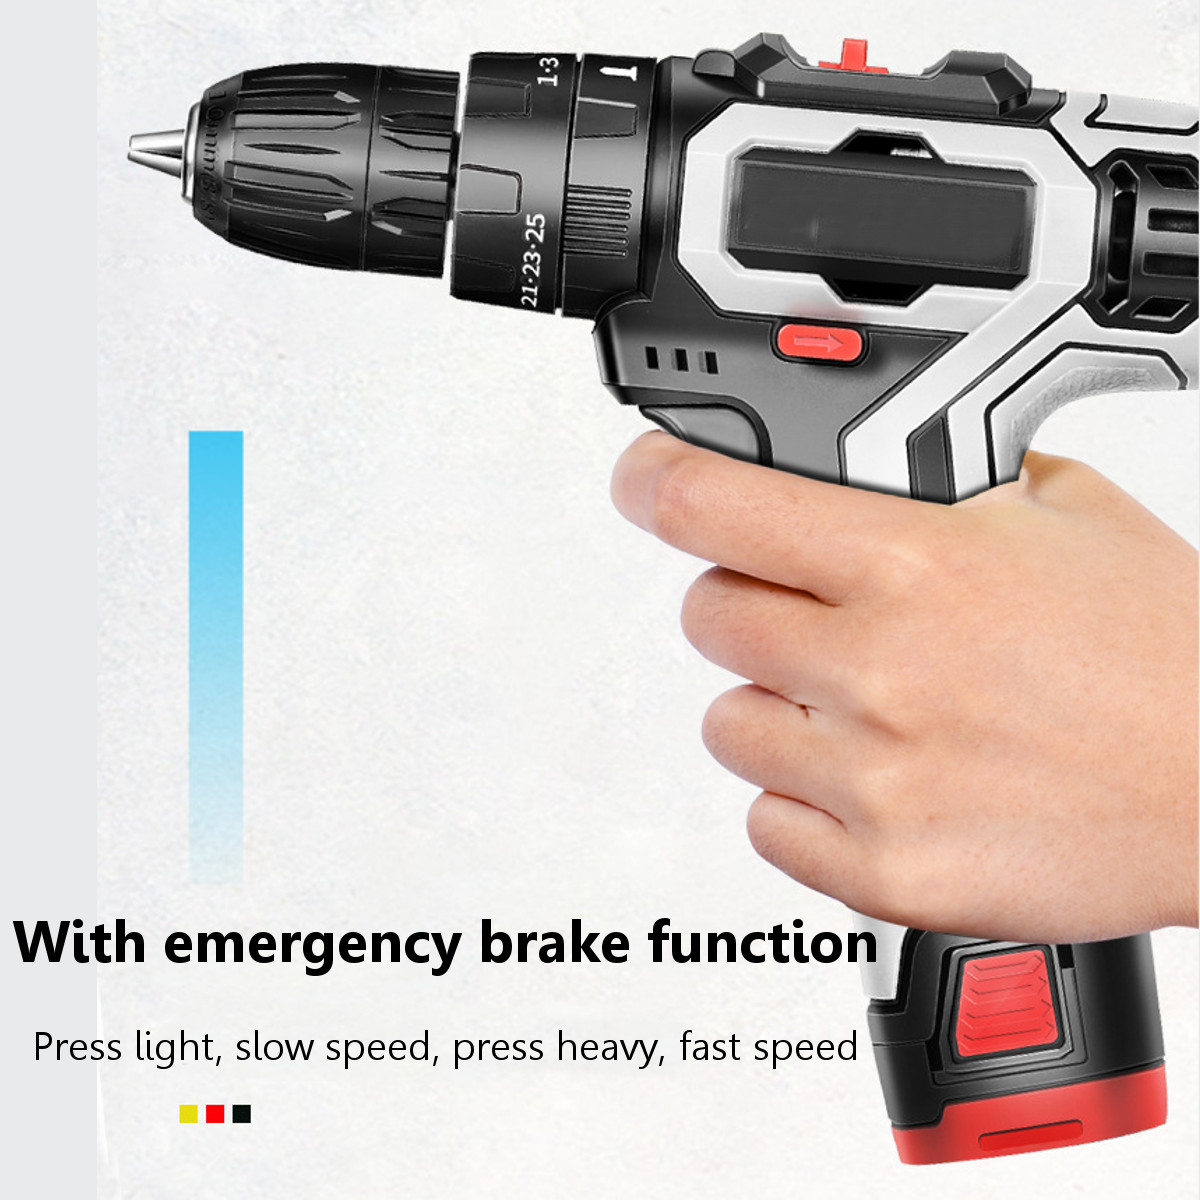 12V-1500mAH-25NM-Rechargeable-Cordless-Drill-2-Speeds-Electric-Screwdriver-Power-Tool-1736770-3